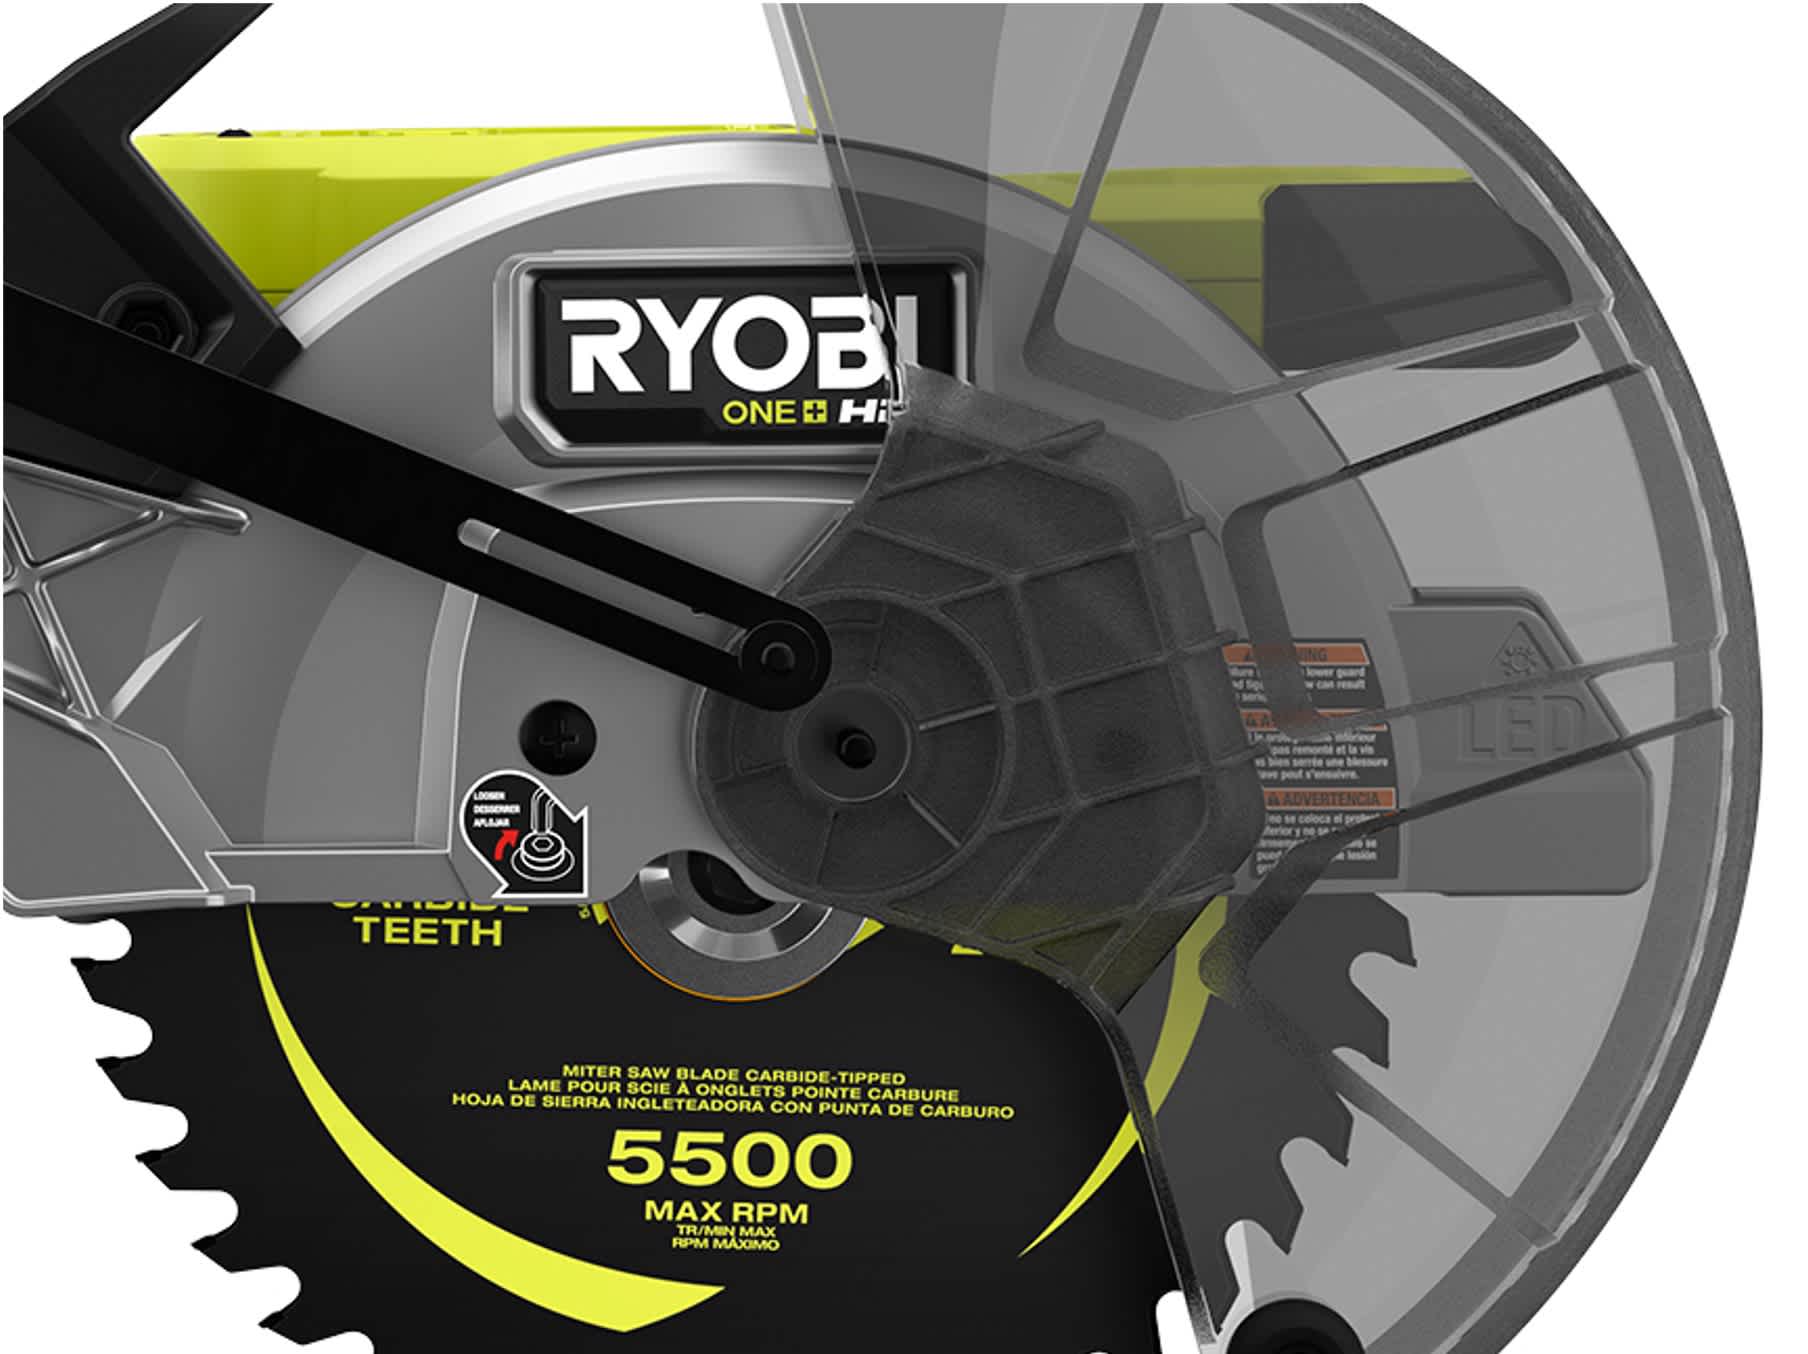 Product Features Image for 18V ONE+ HP BRUSHLESS 10" SLIDING COMPOUND MITER SAW KIT.